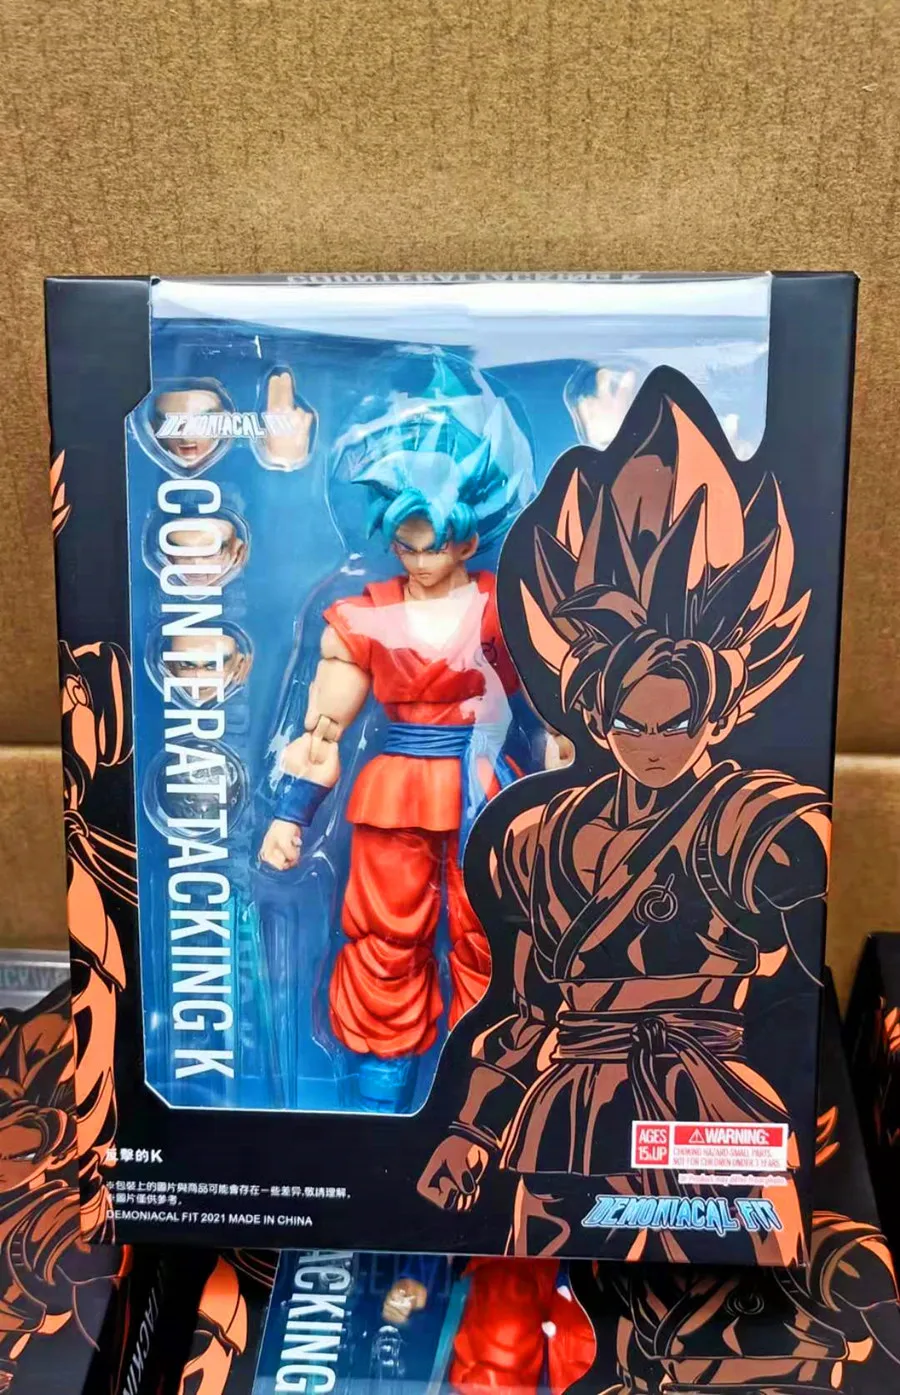 Niacal fit df counter attacking k son goku action figures model toy brinquedos figurals thumb200